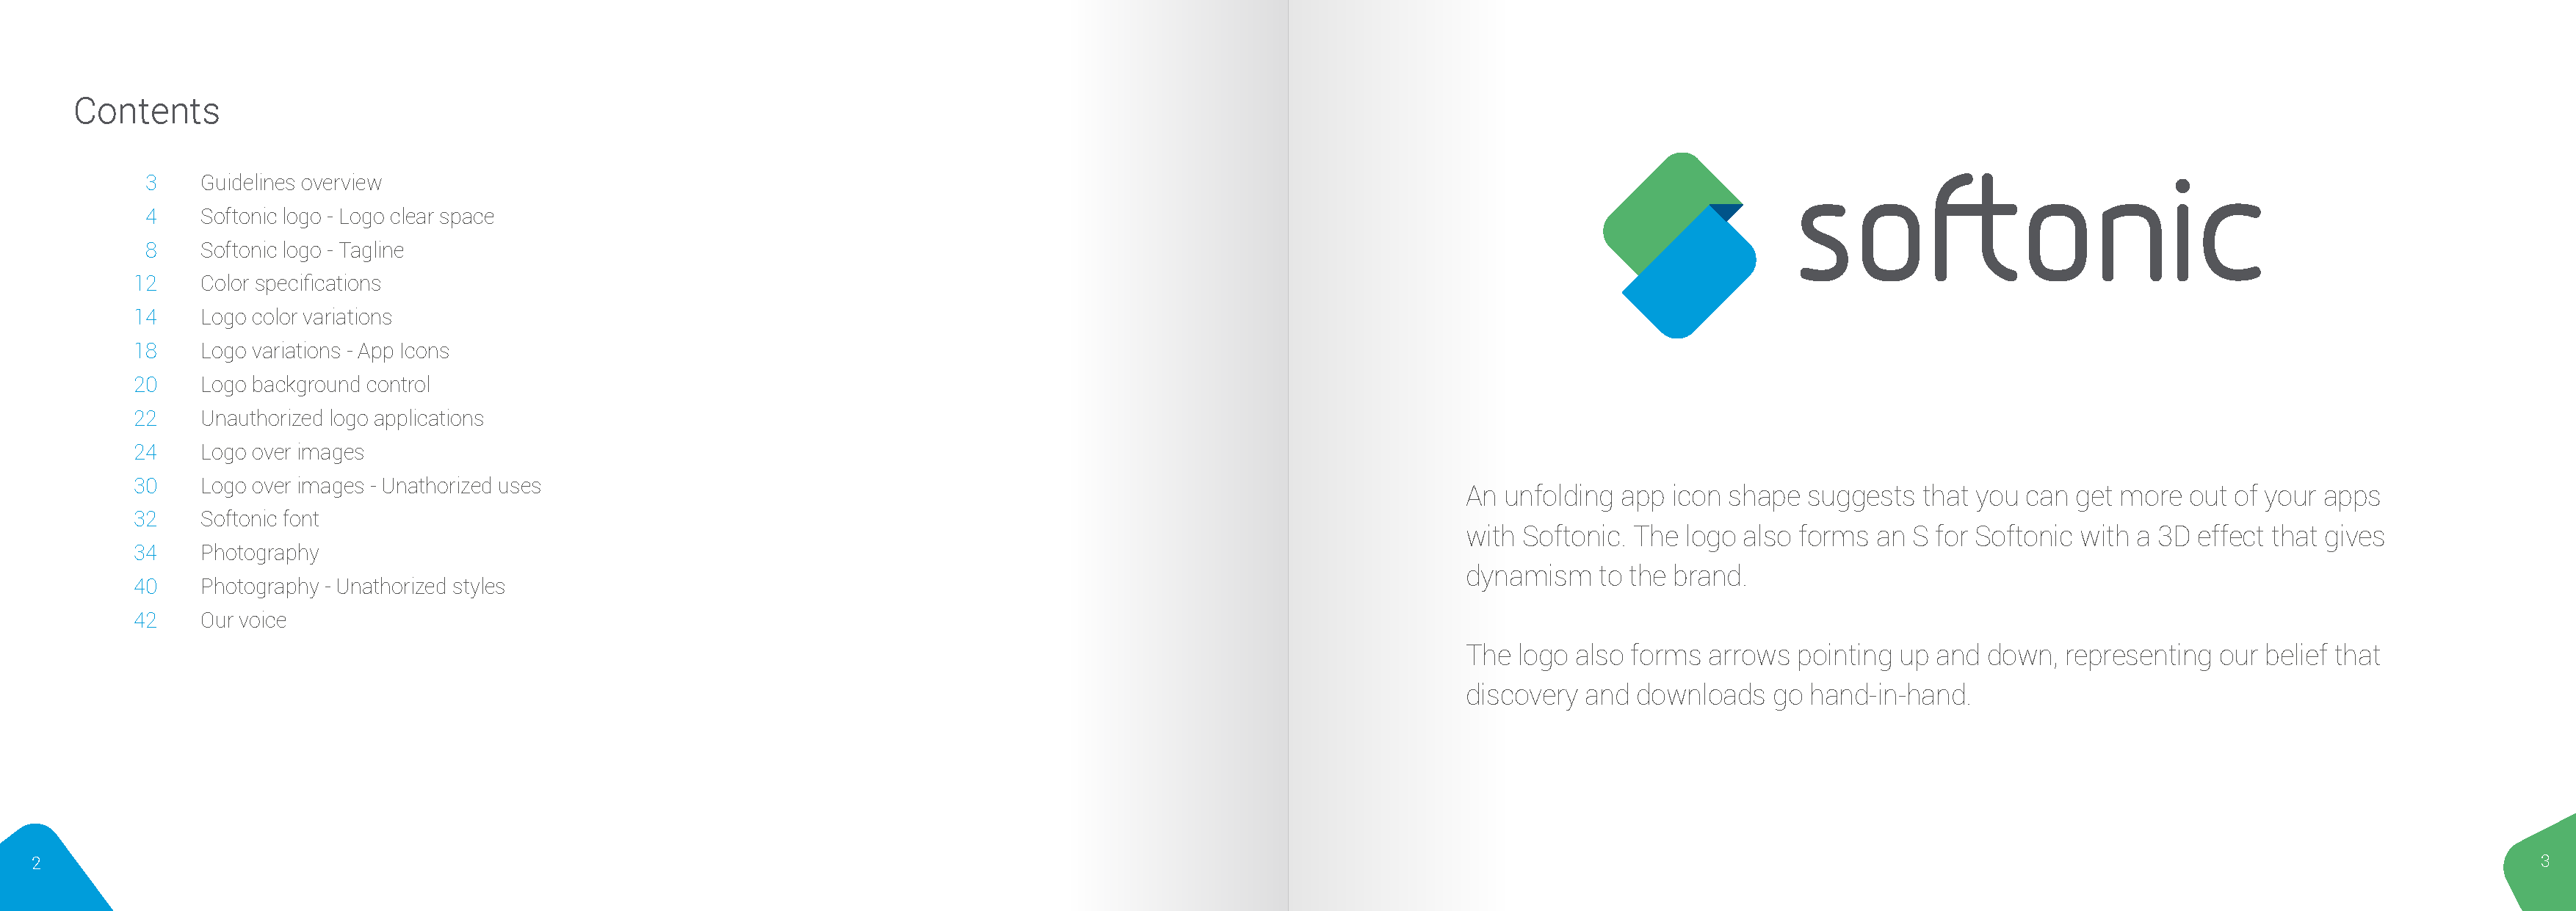 Softonic-Brand-Guidelines_Page_02